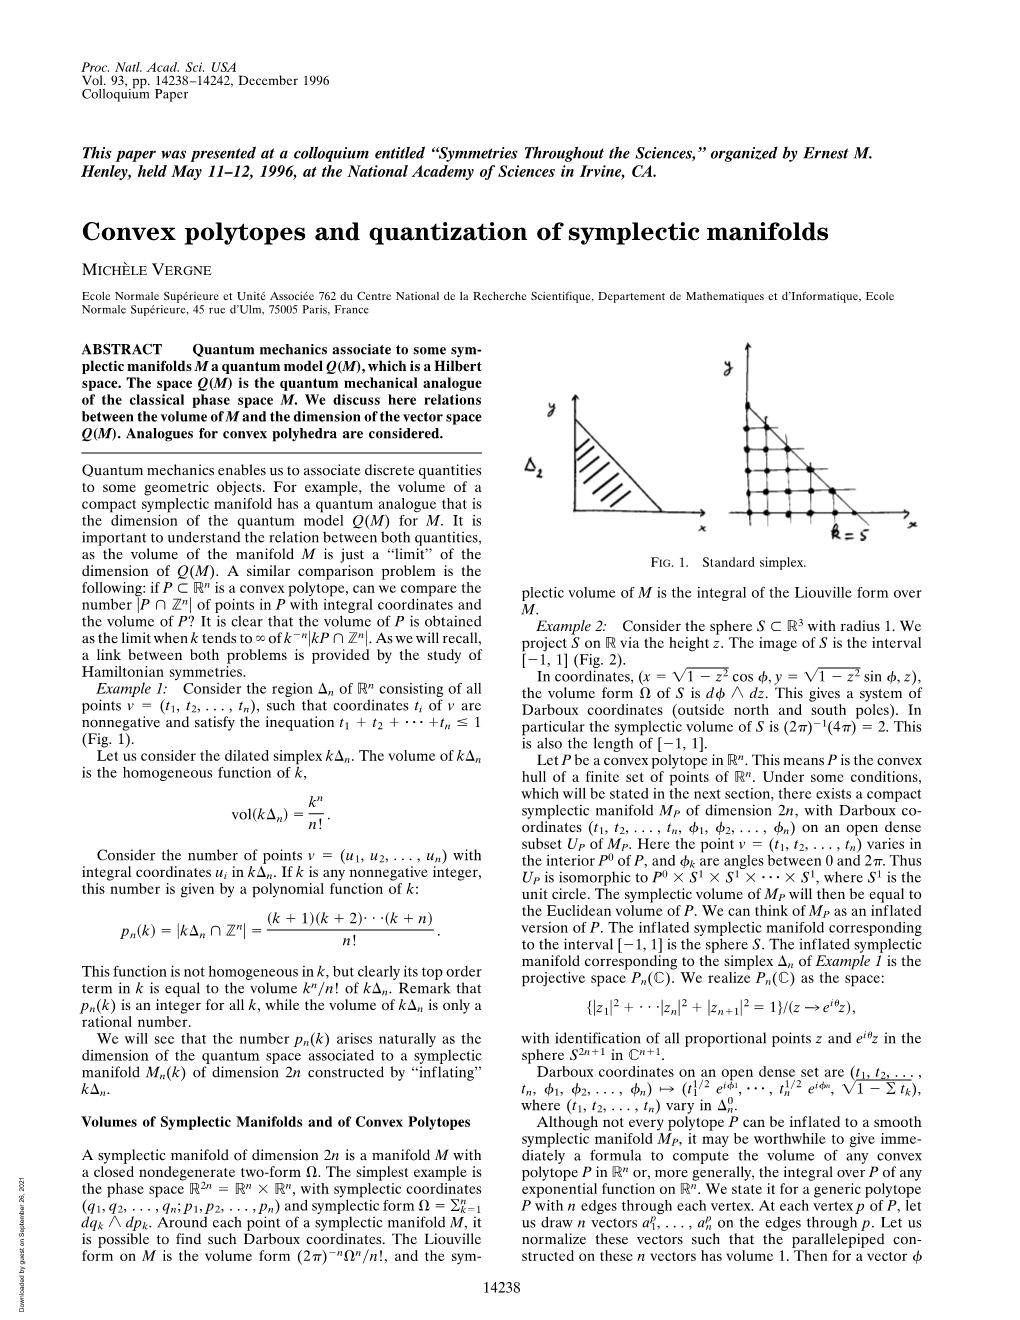 Convex Polytopes and Quantization of Symplectic Manifolds